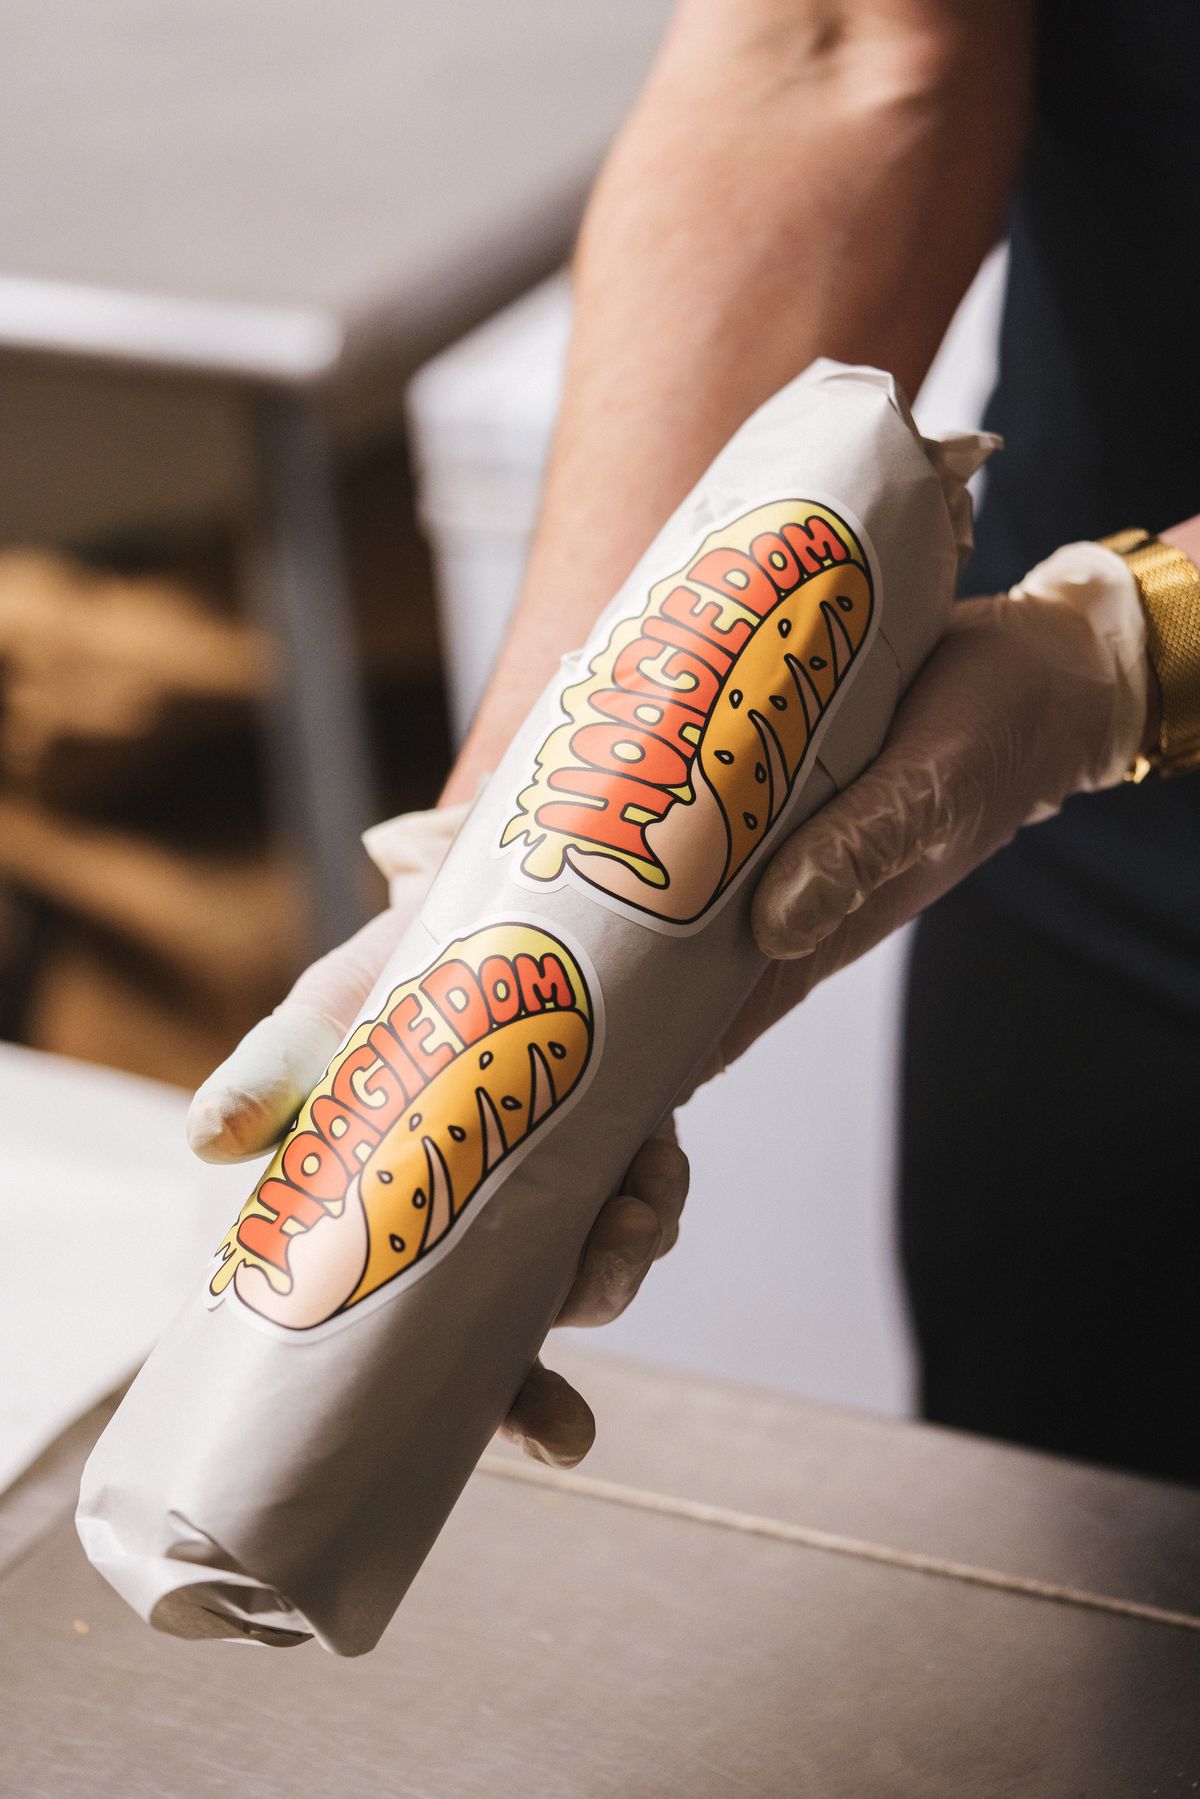 Two hands hold out a hoagie wrapped in paper with two stickers that say Hoagie Dom.